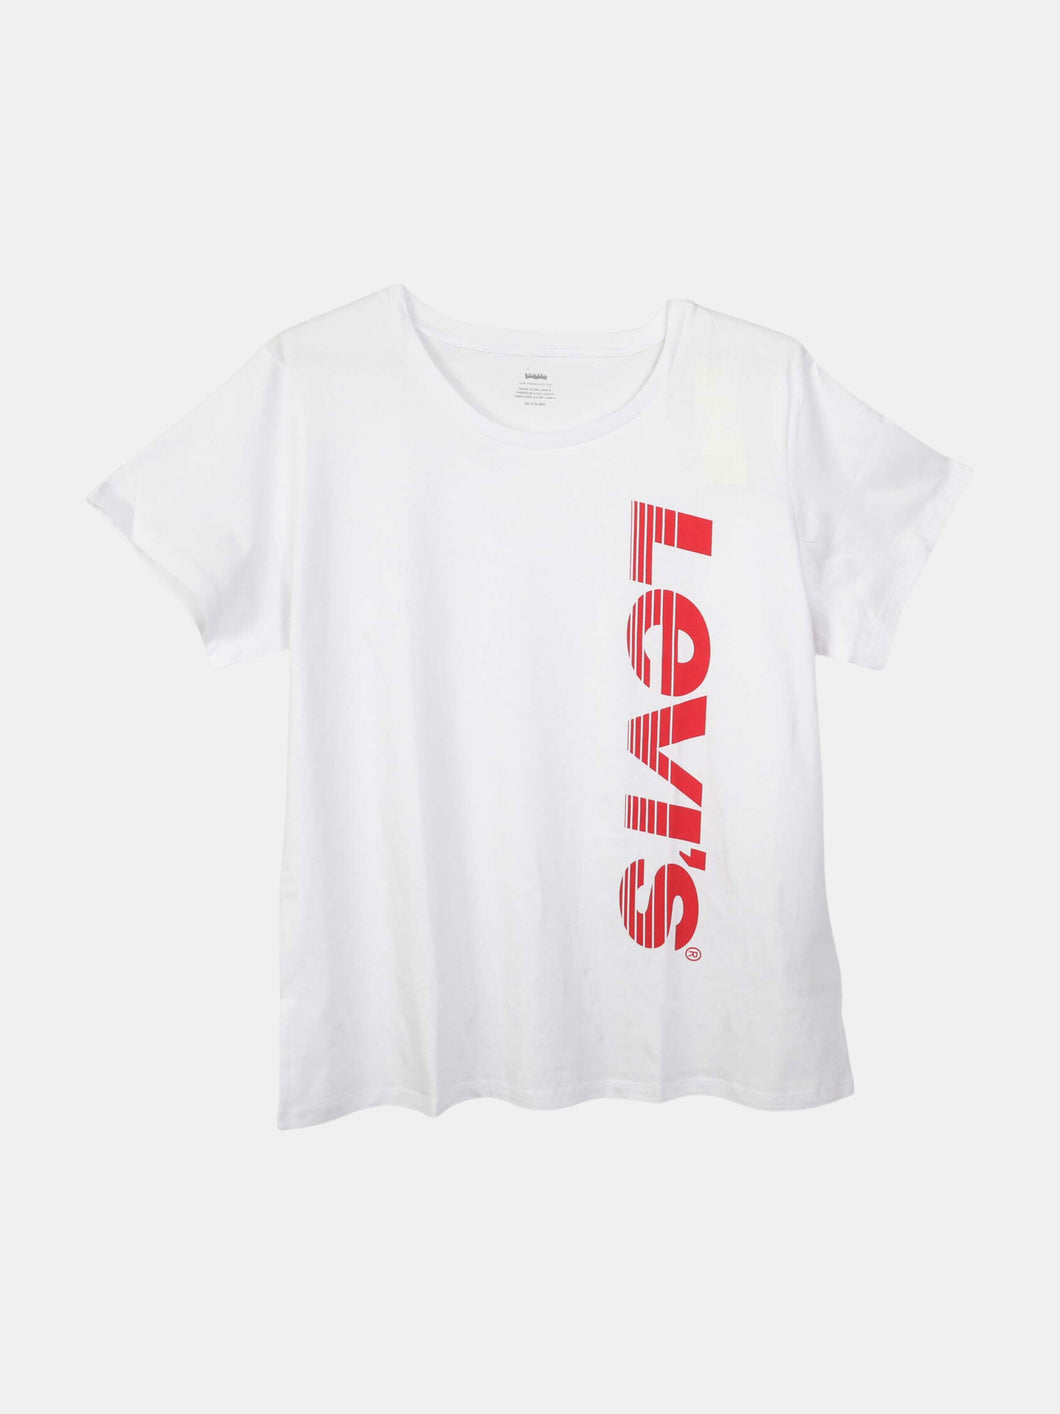 Levis Women's Red / White Levi's Logo Tee Graphic T-Shirt